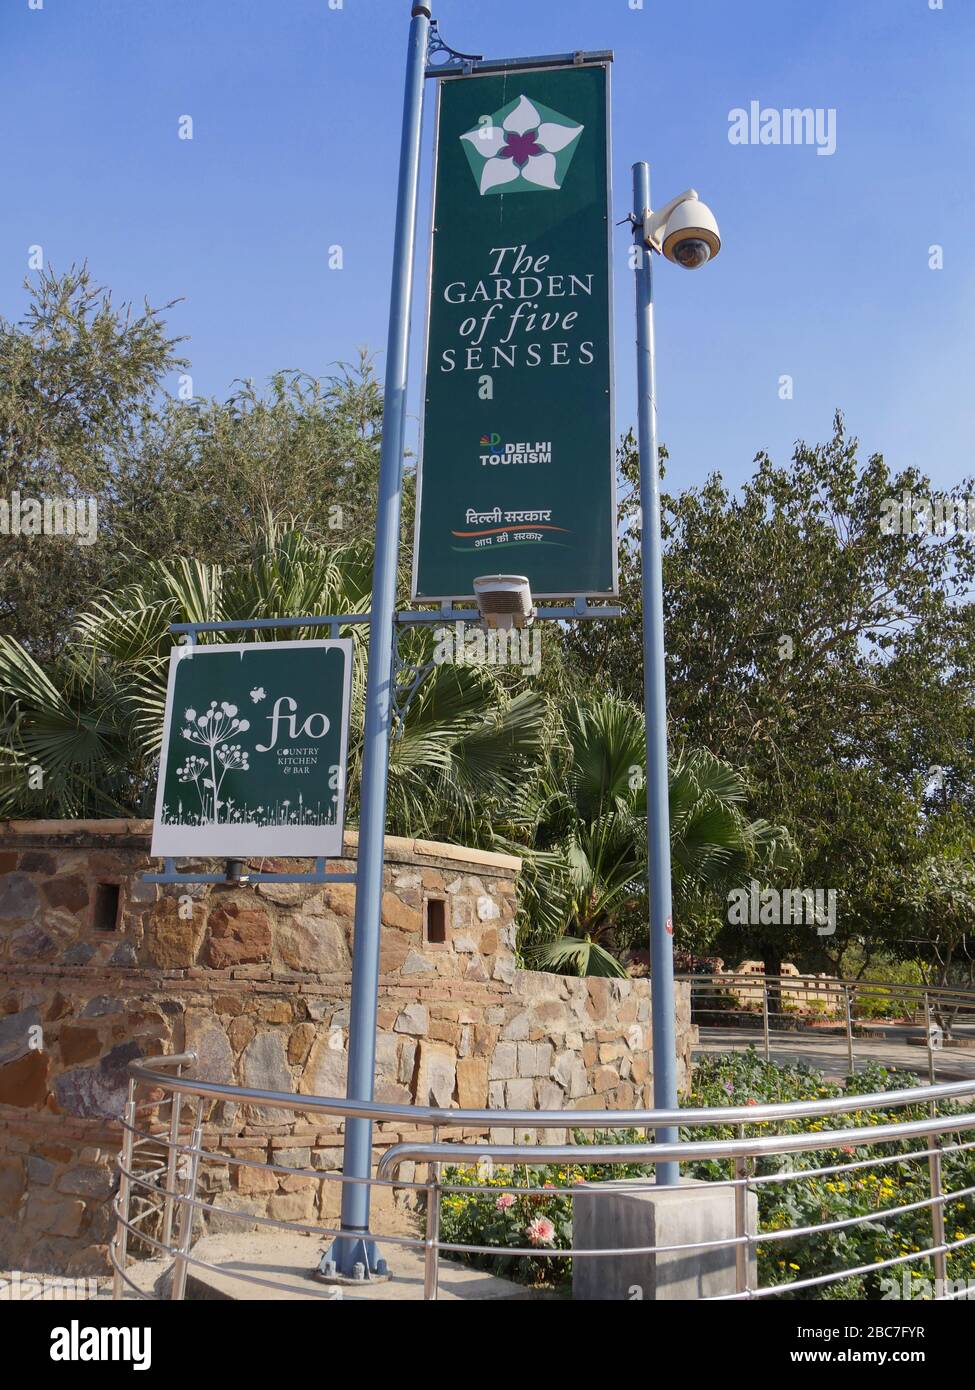 New Delhi, India- March 2018: Sign near the entrance of the Garden of Five Senses, one of the top attractions in New Delhi. Stock Photo